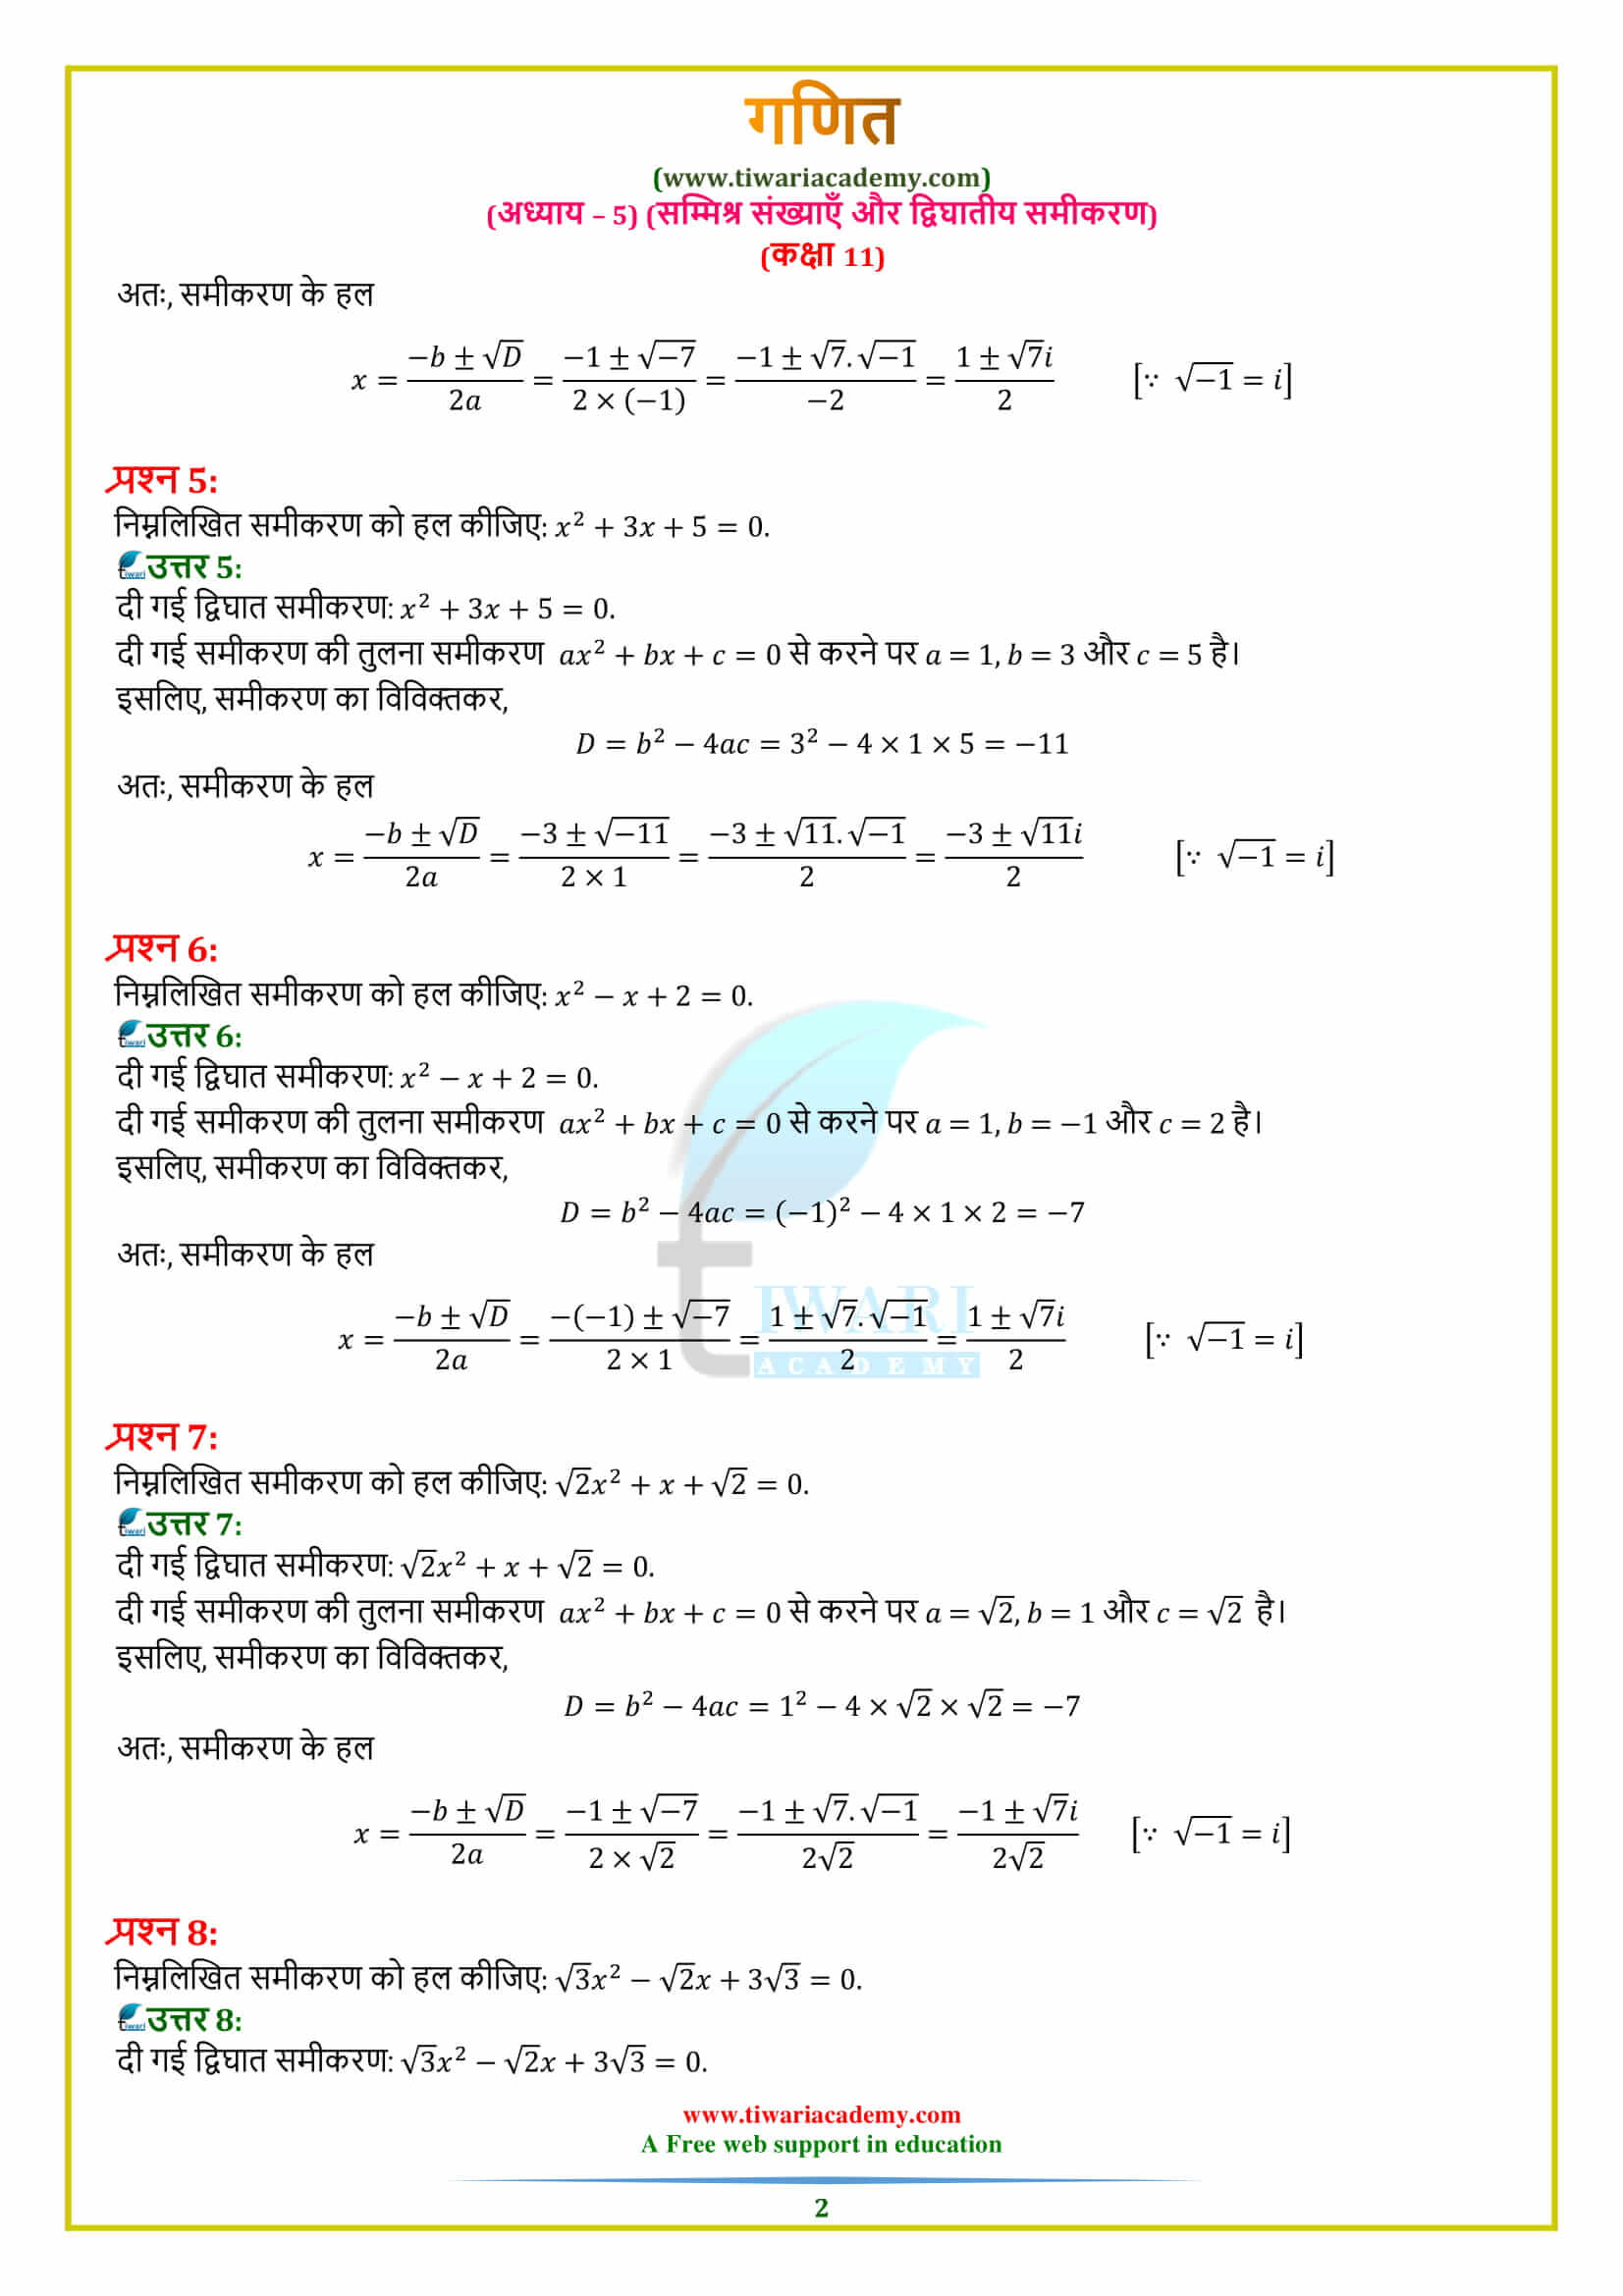 Class 11 Maths Chapter 5 Exercise 5.3 sols in Hindi pdf for inter